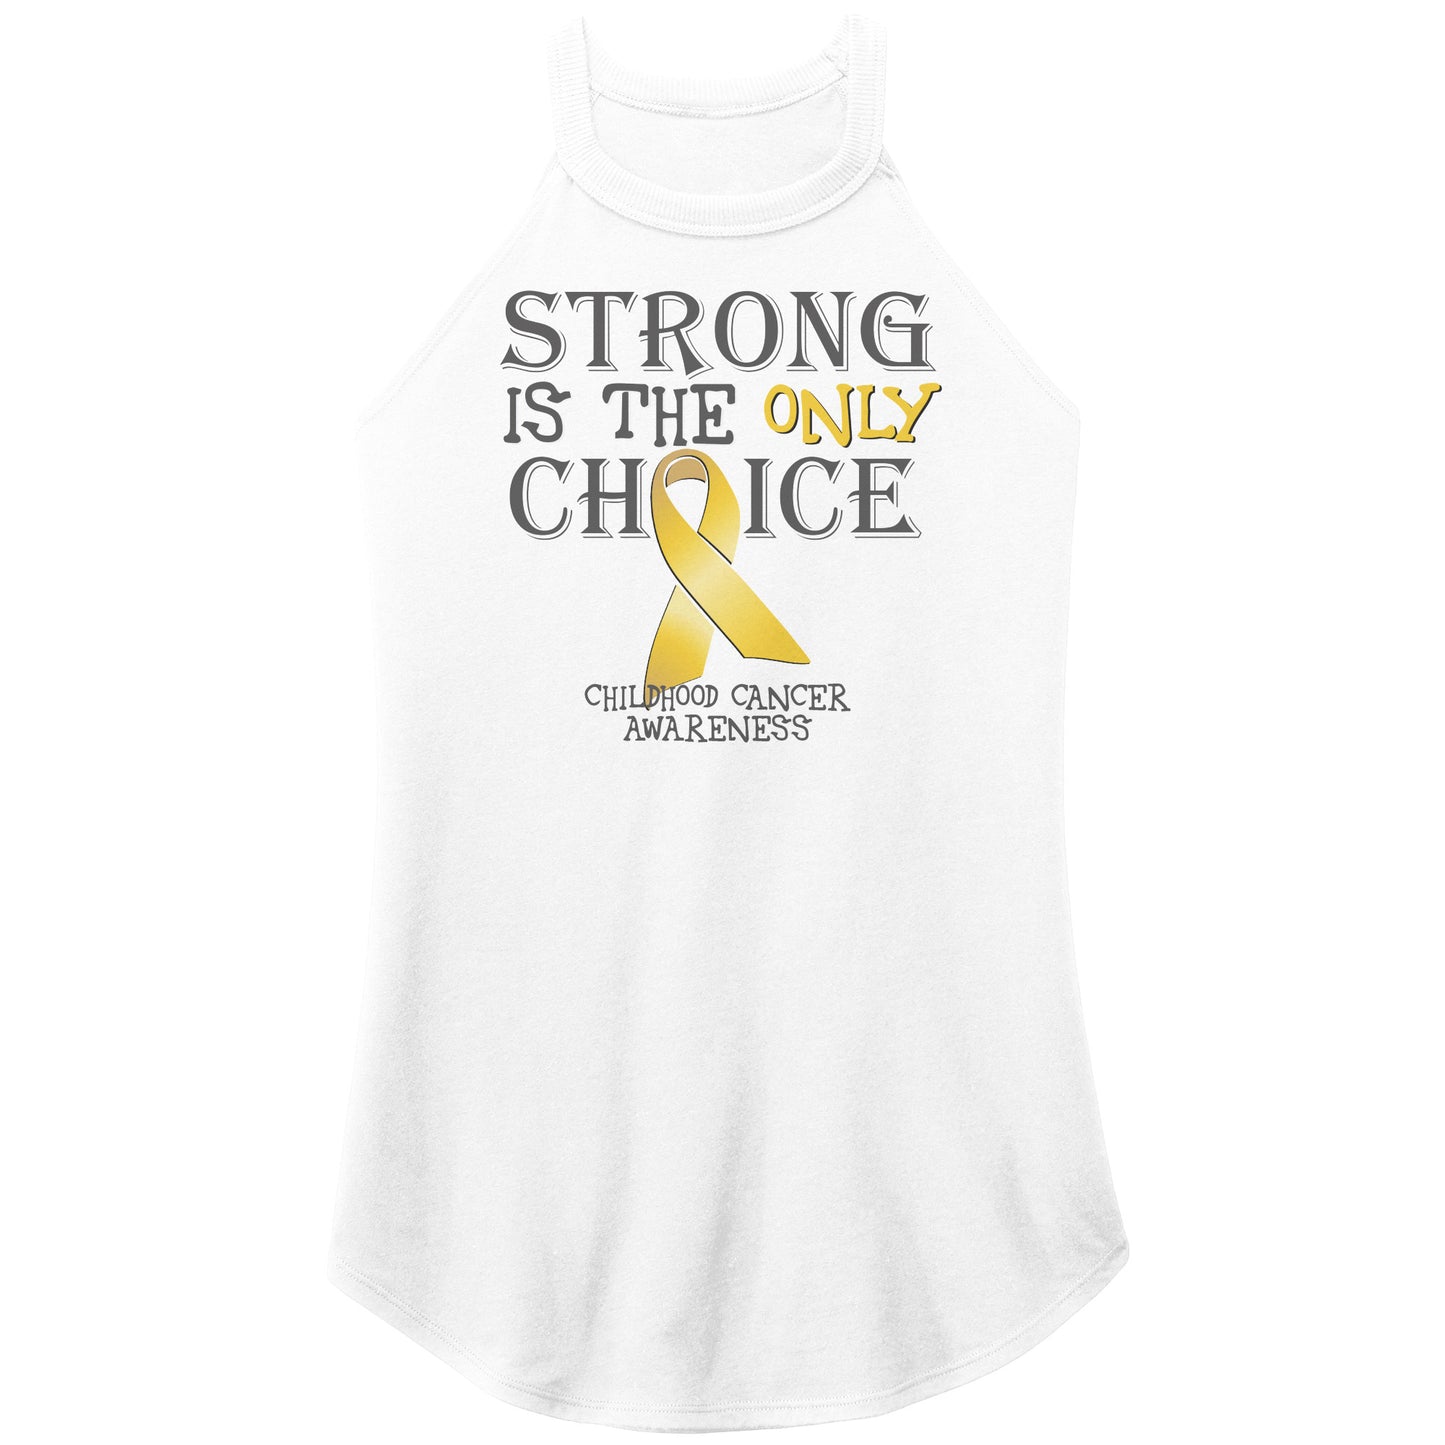 Strong is the Only Choice -Childhood Cancer Awareness T-Shirt, Hoodie, Tank